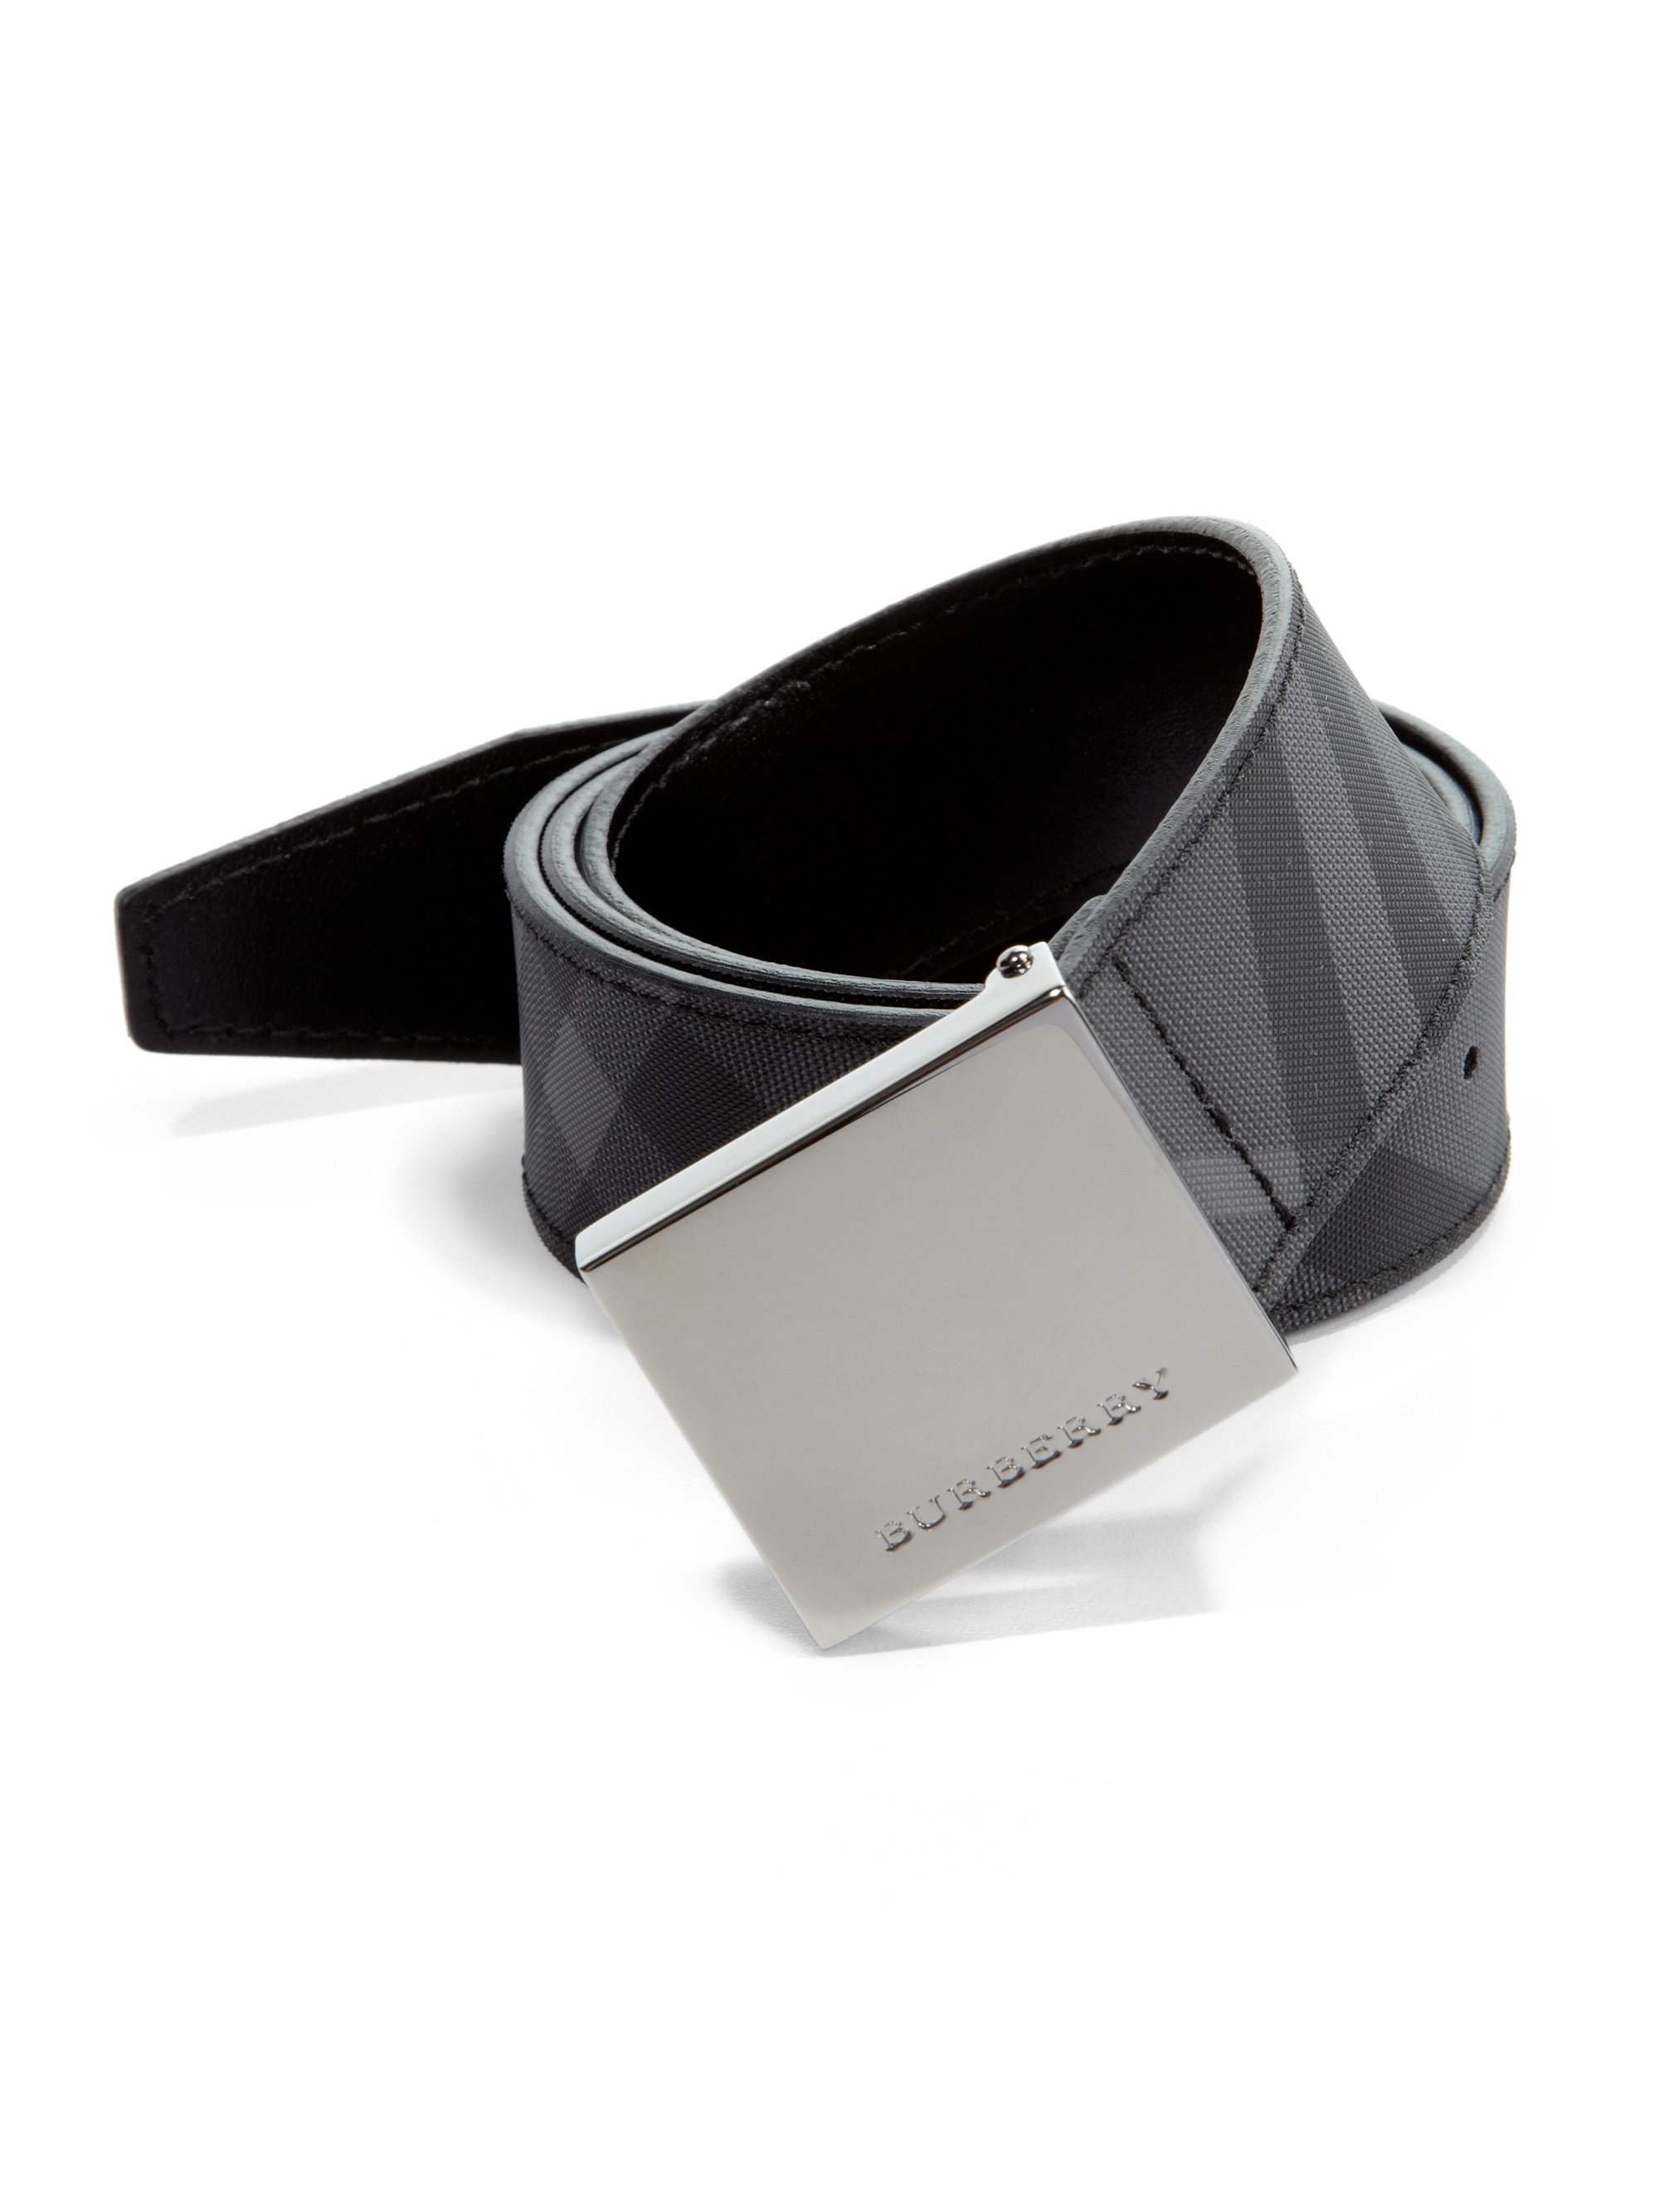 Lyst - Burberry Lucius Check Belt in Black for Men